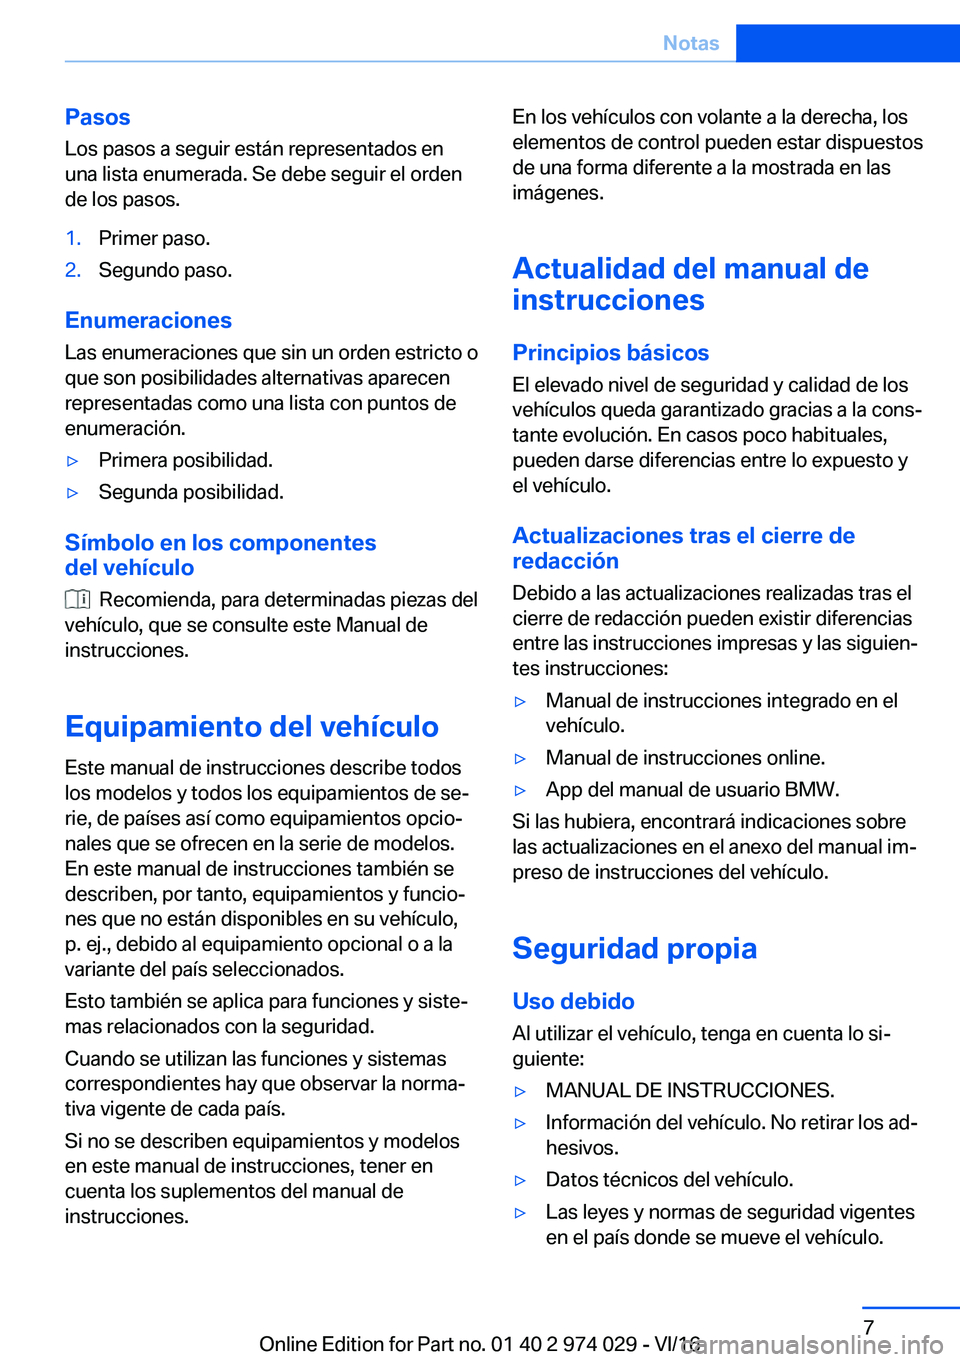 BMW M3 2017  Manuales de Empleo (in Spanish) �P�a�s�o�s
�L�o�s� �p�a�s�o�s� �a� �s�e�g�u�i�r� �e�s�t�